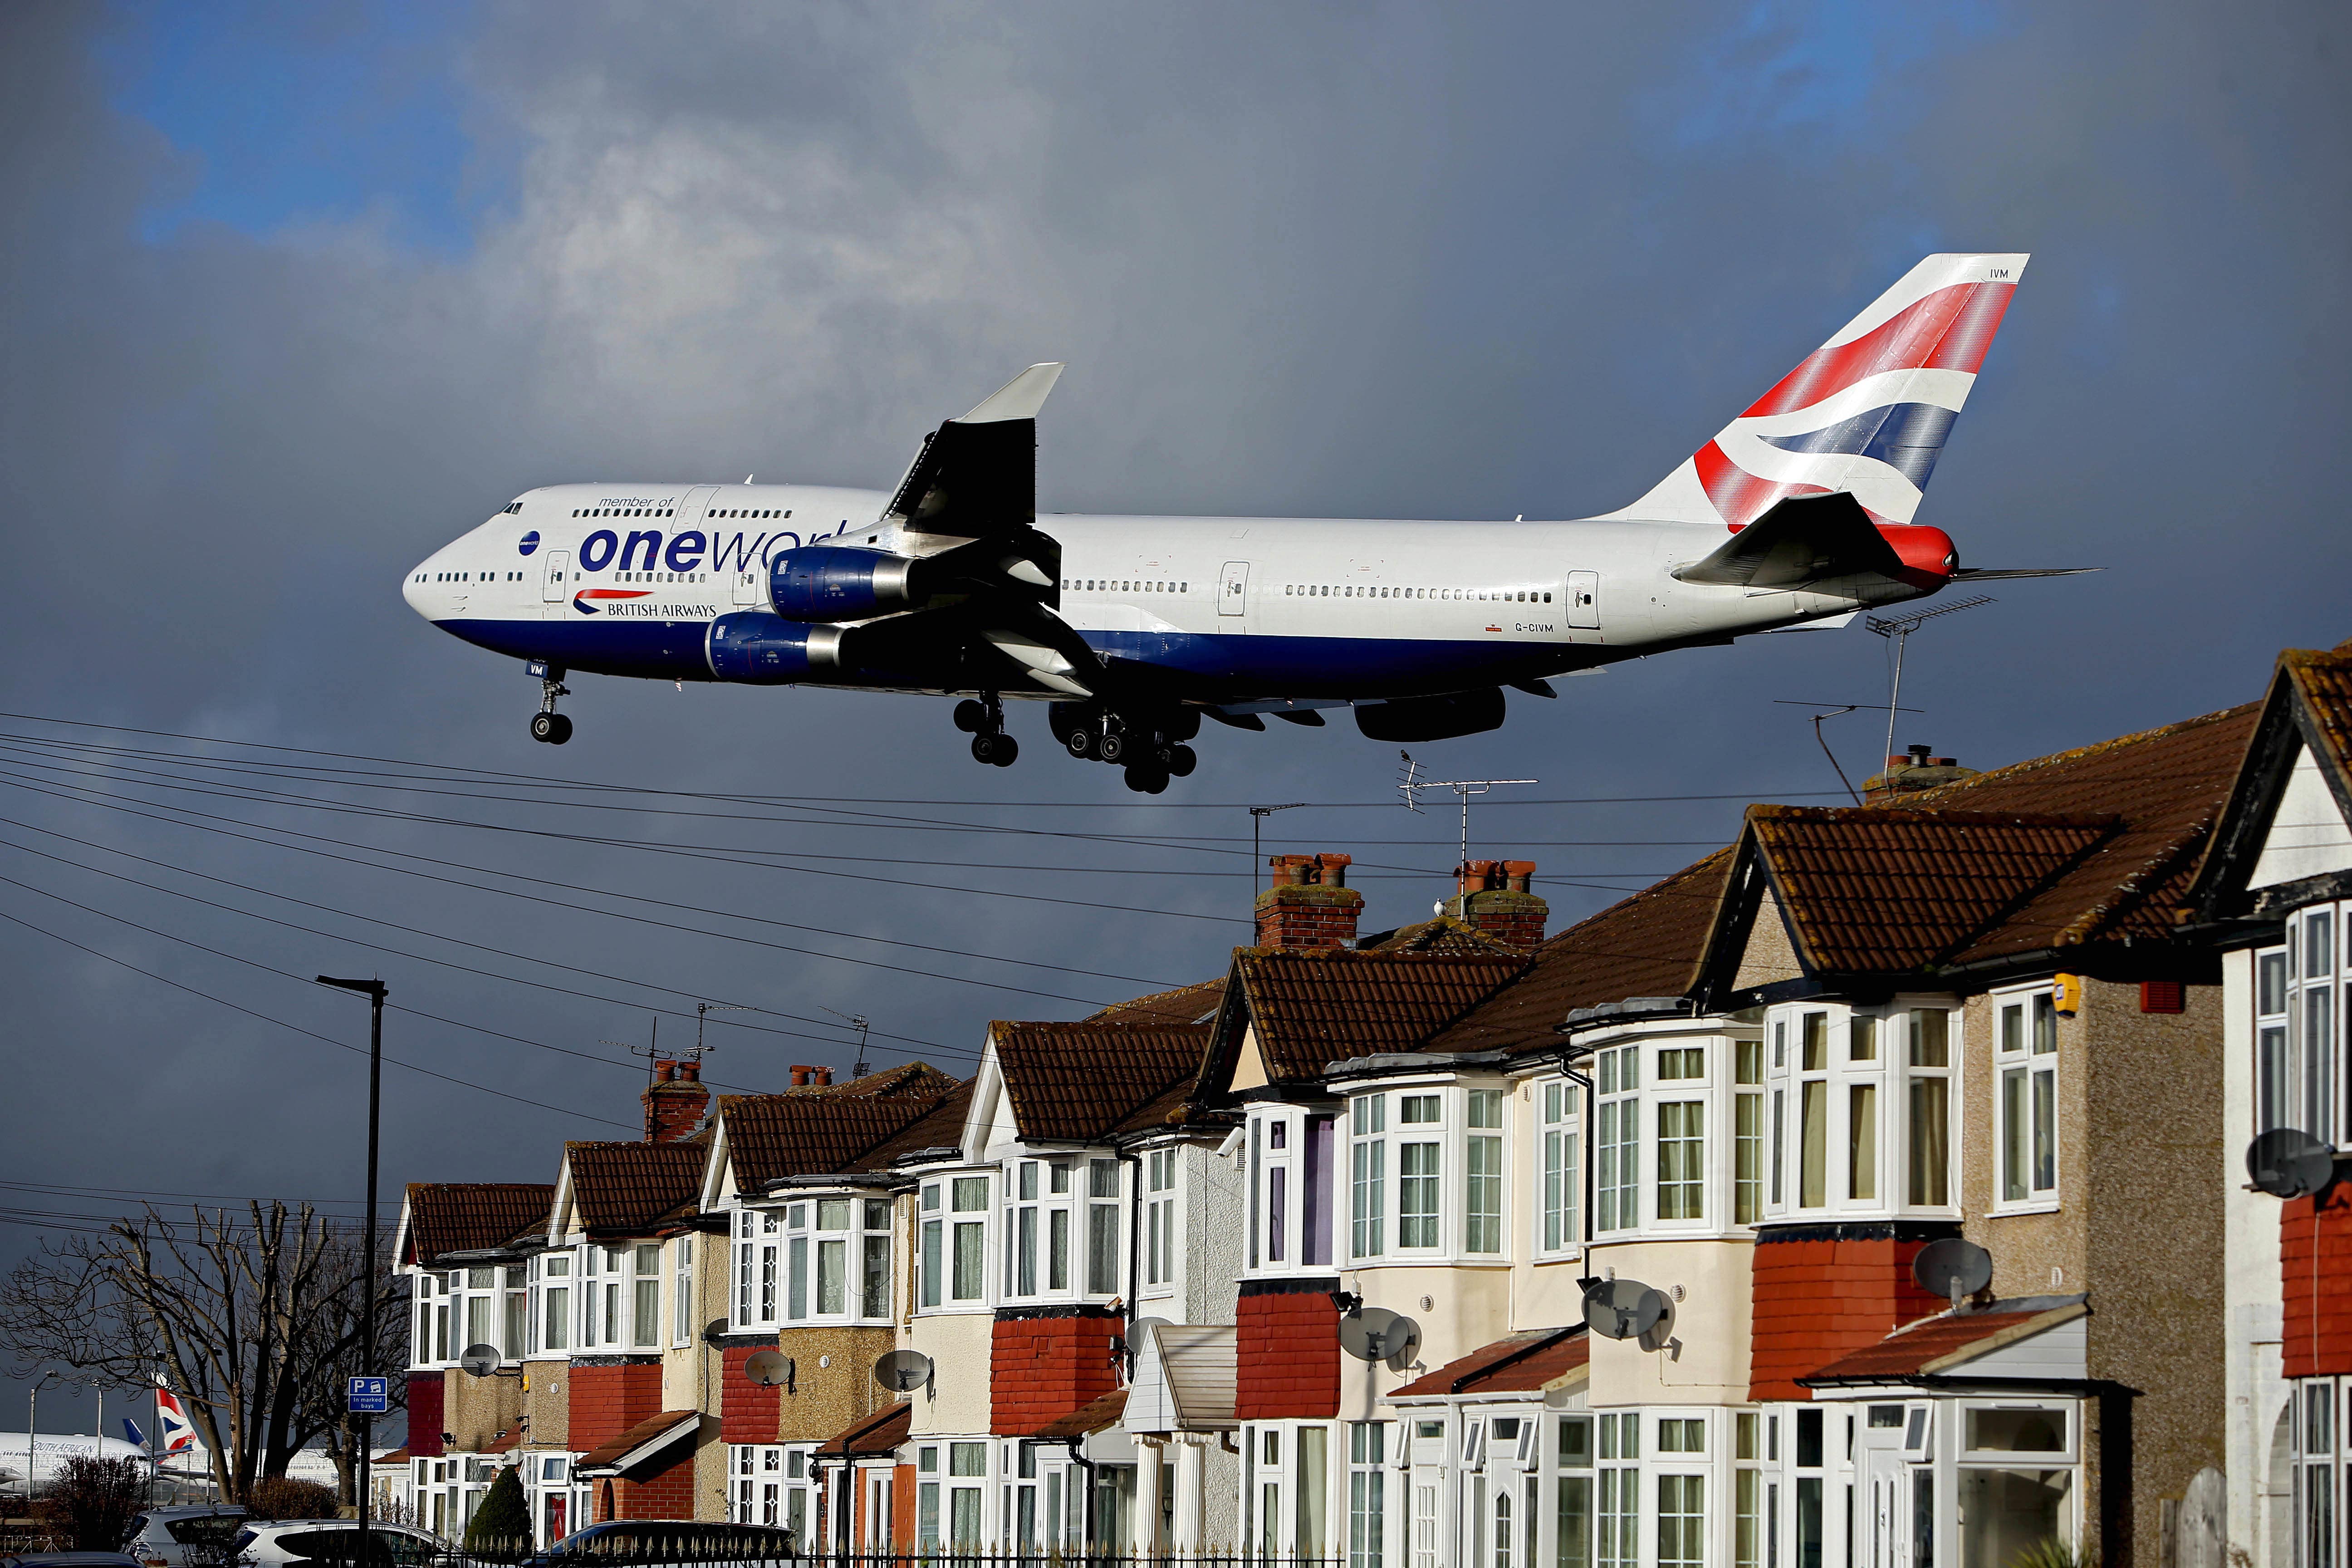 The study looked at hospital admissions of those who live under Heathrow Airport’s flight paths